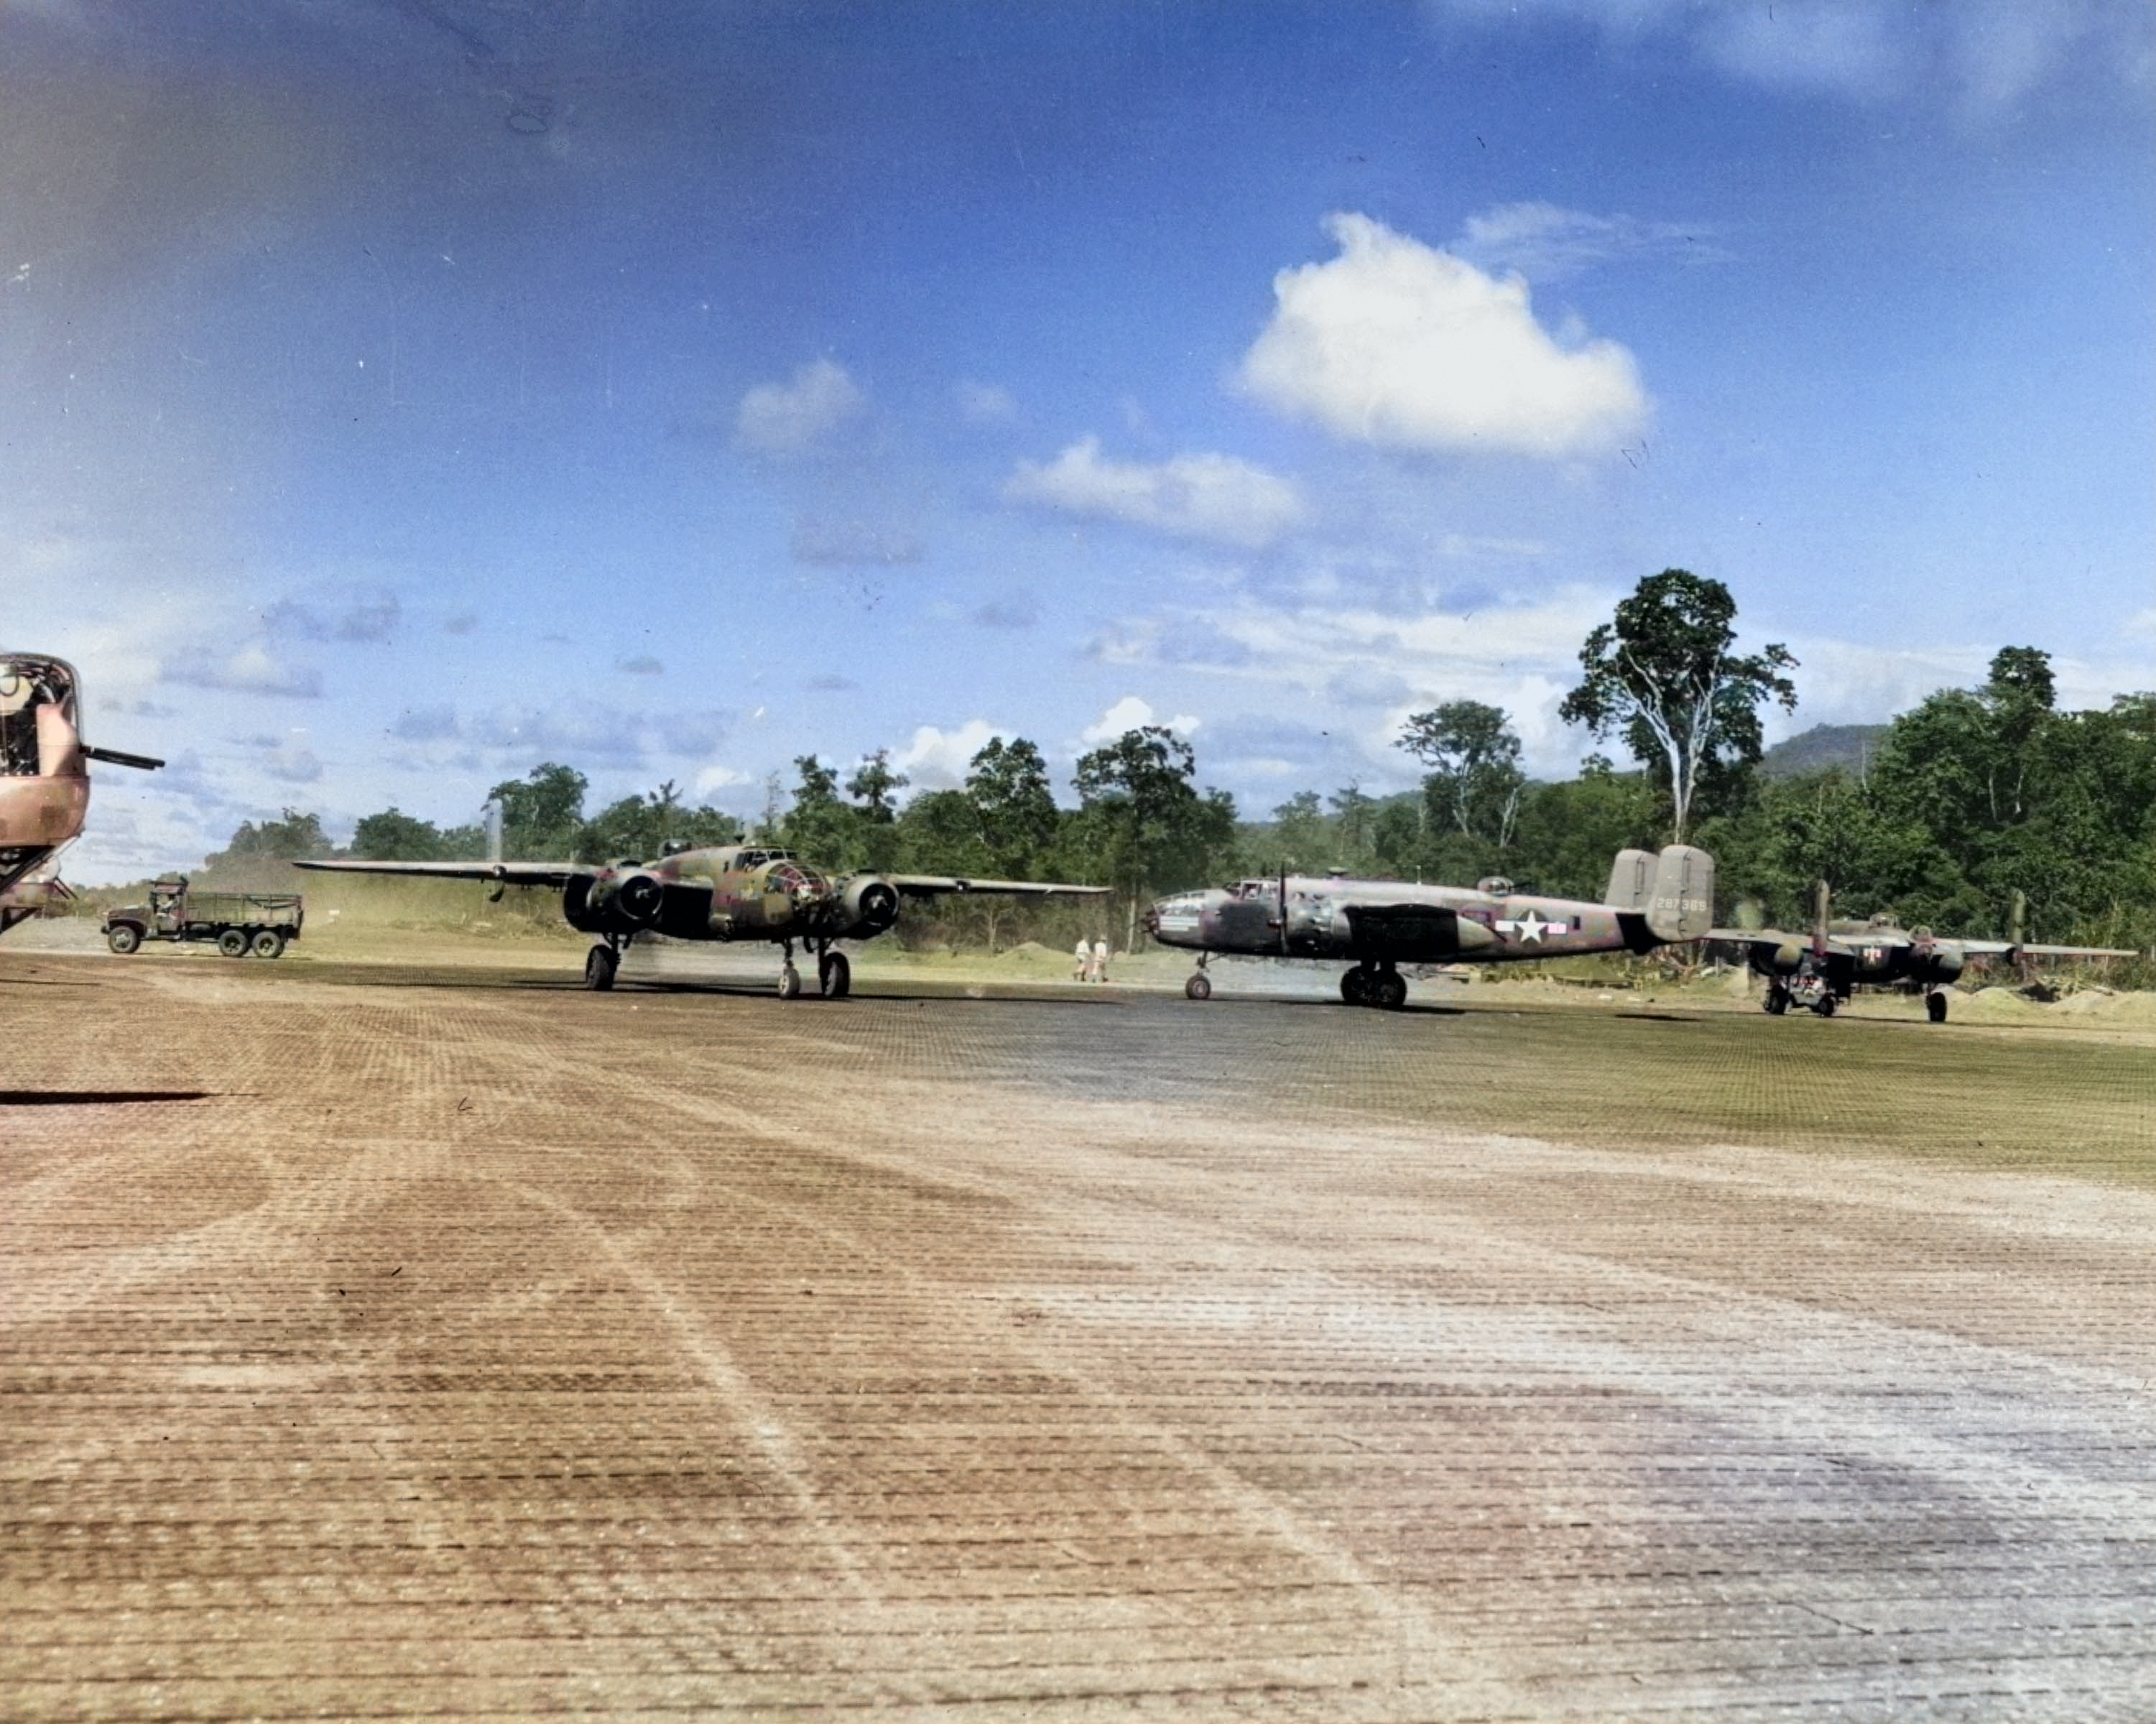 B-25 Mitchell bombers of the 42nd Bomb Group on the ramp at Munda, New Georgia, Solomons, 1943. Note B-24 Liberator nose turrets at left. [Colorized by WW2DB]